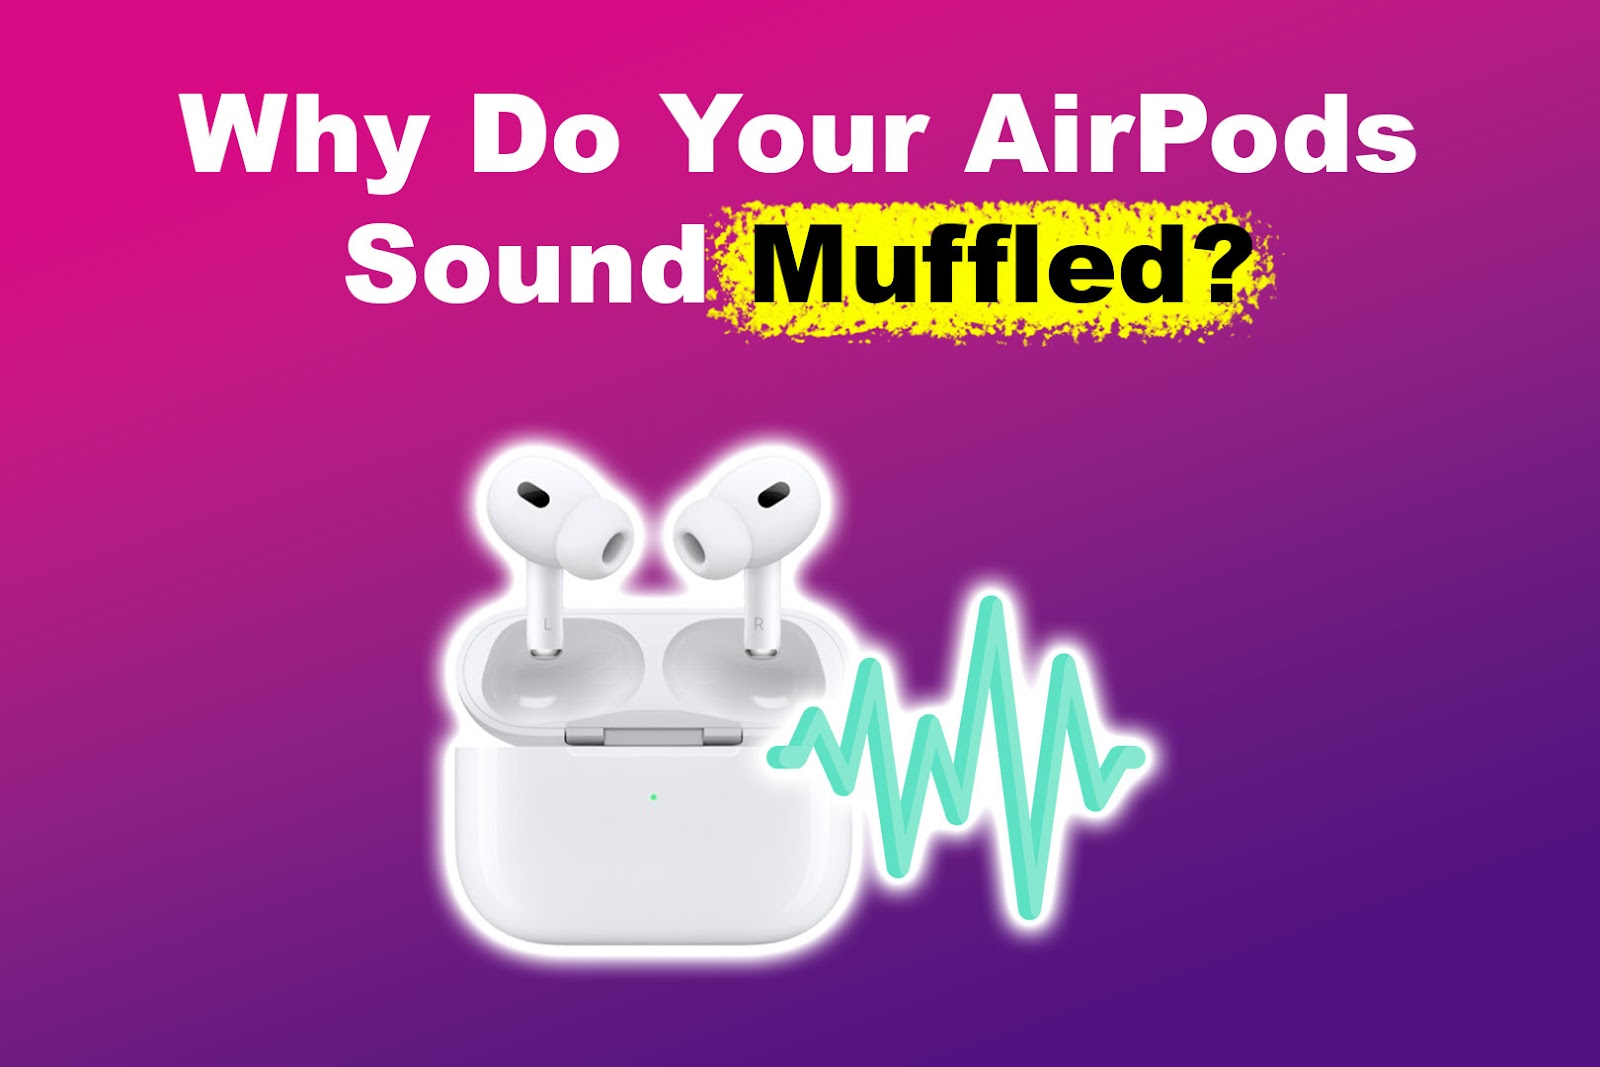 Why Do Your AirPods Sound Muffled